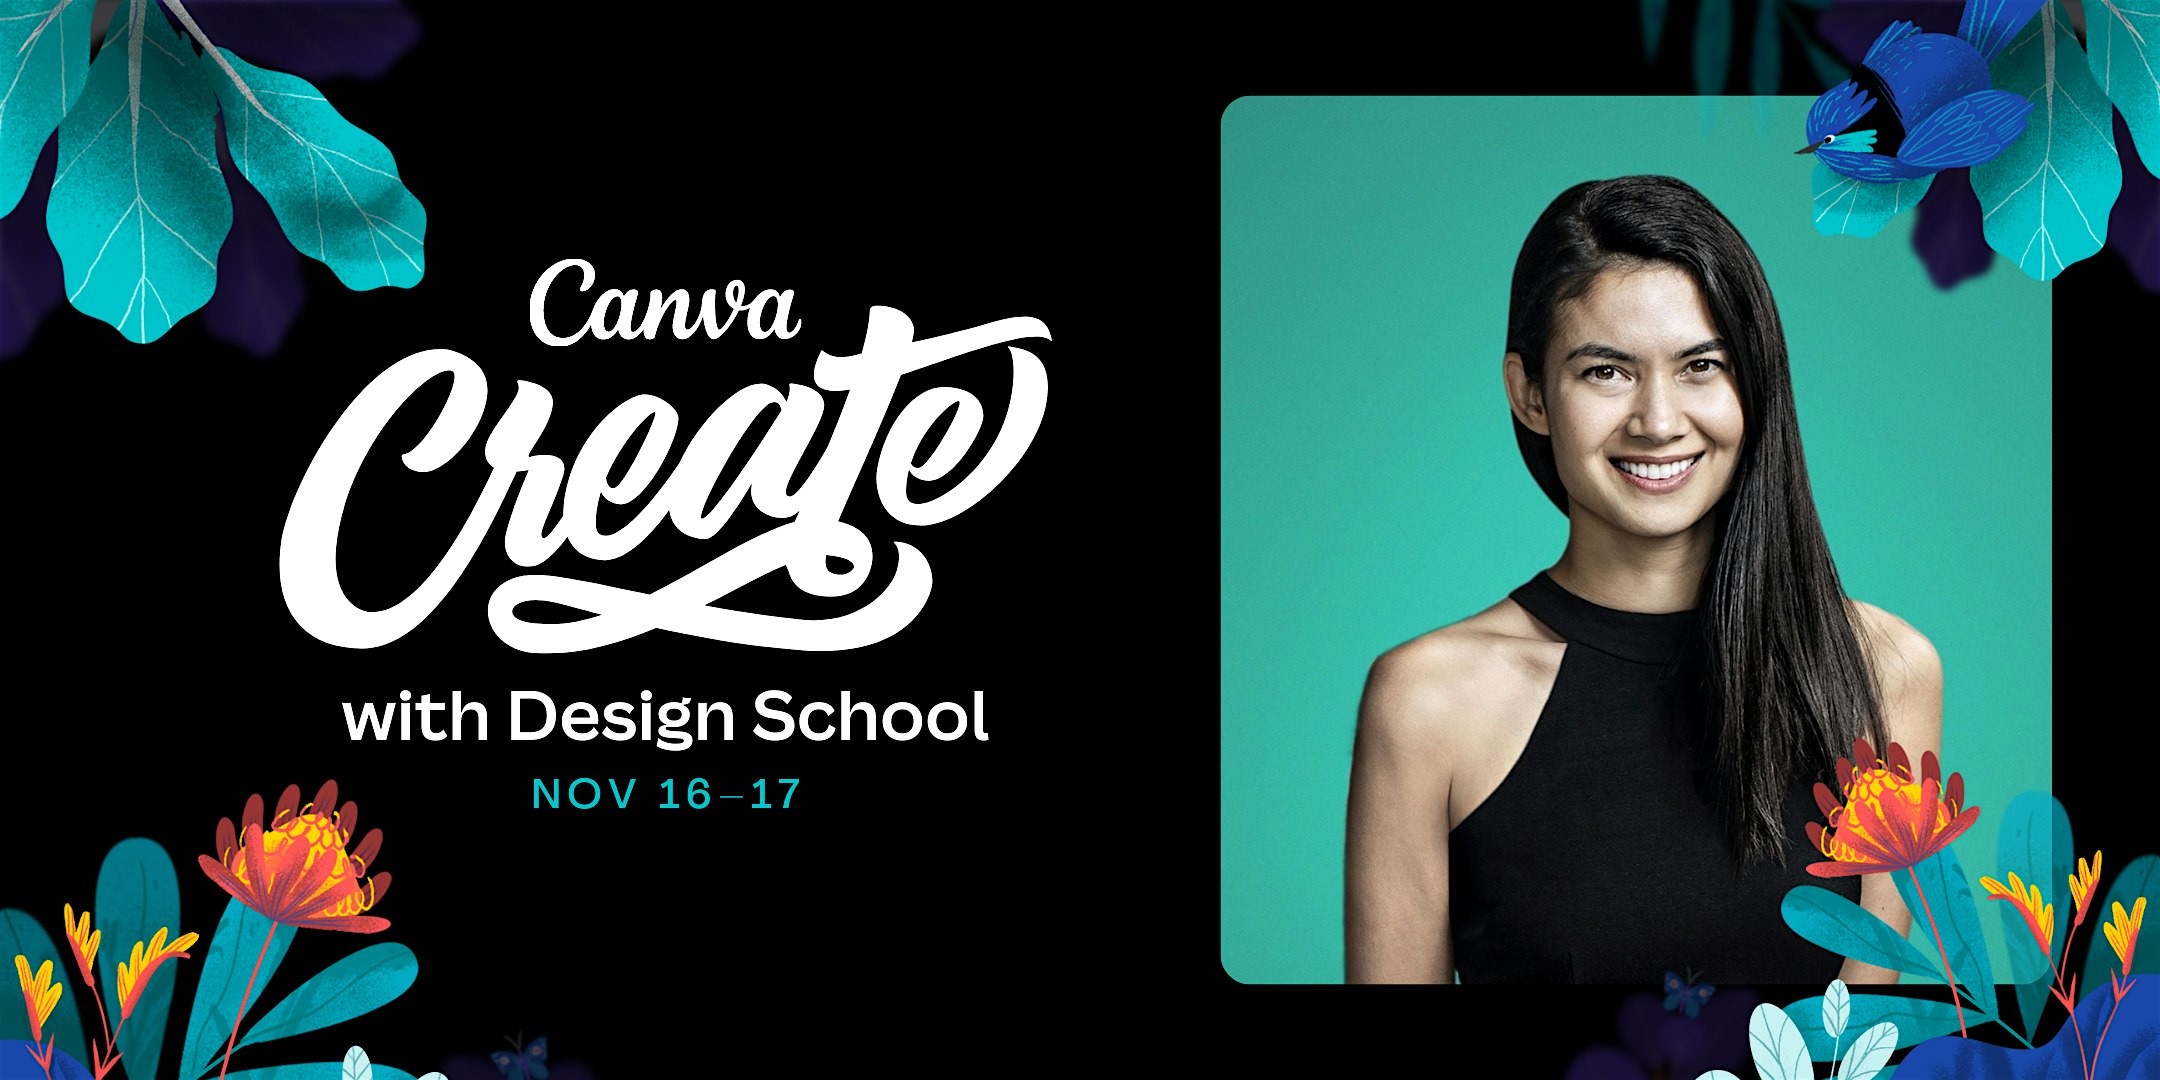 Canva Create Conference - 2 Day - APAC Region